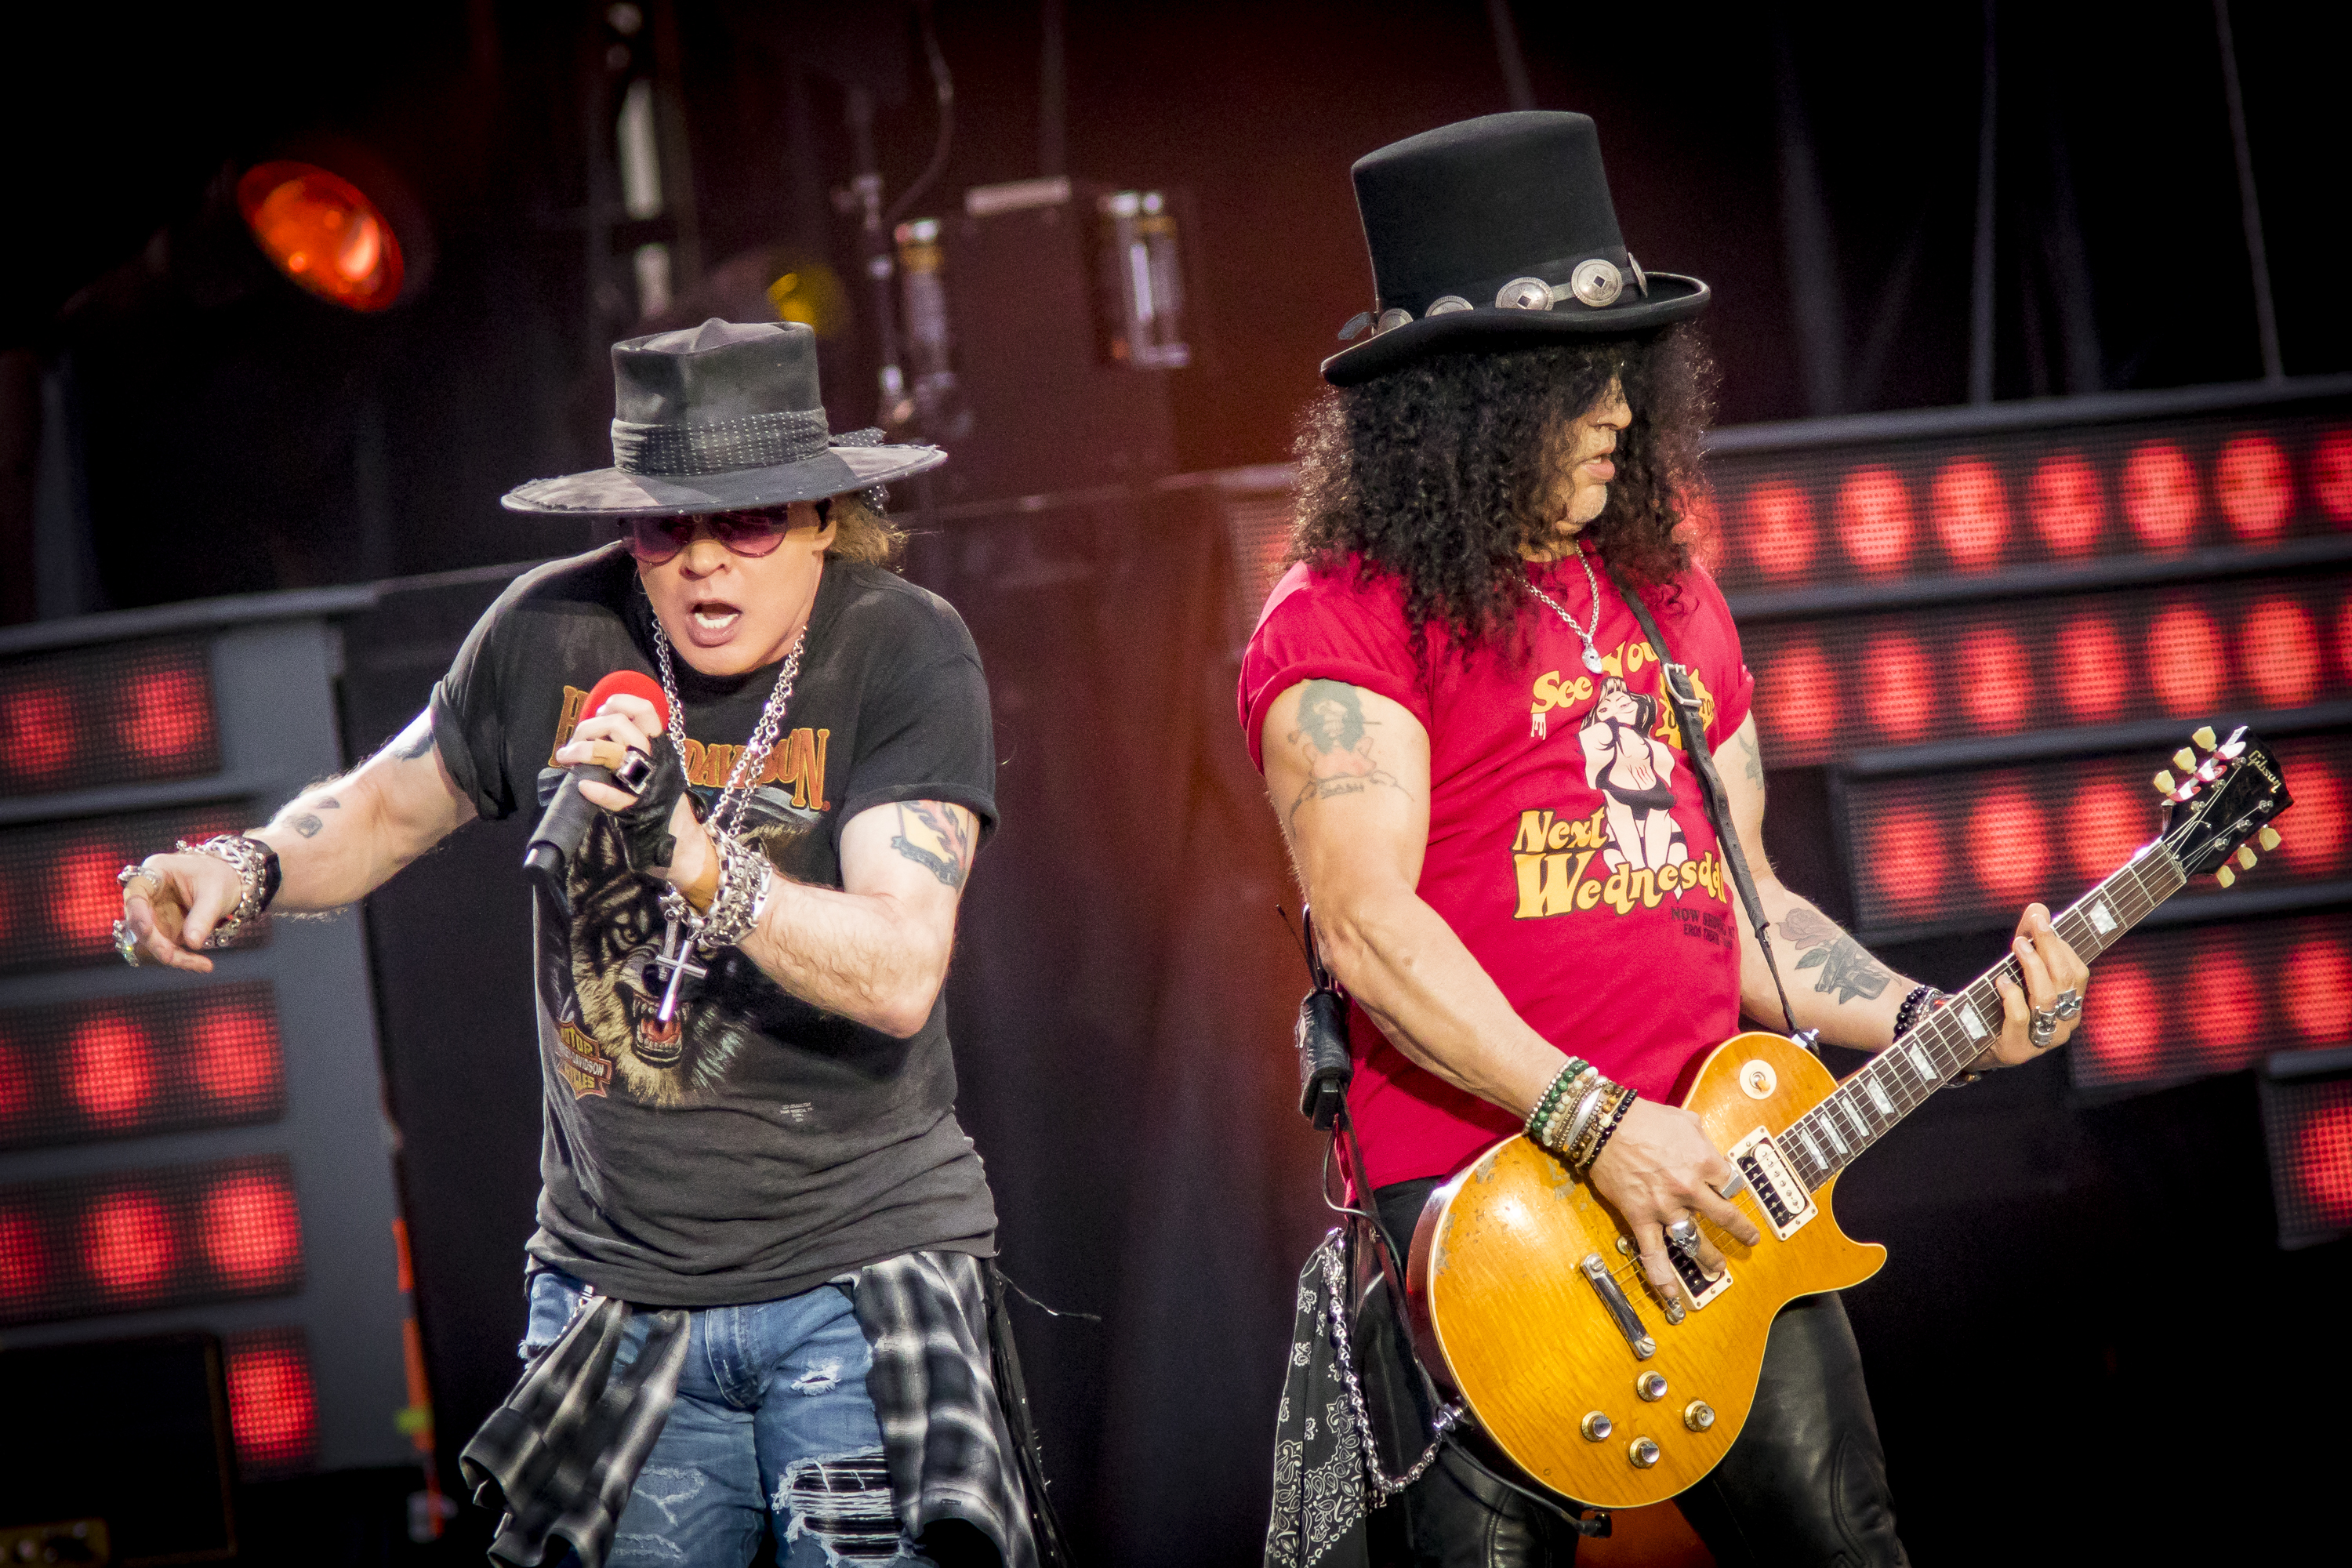 A new Guns N' Roses single could come any day now